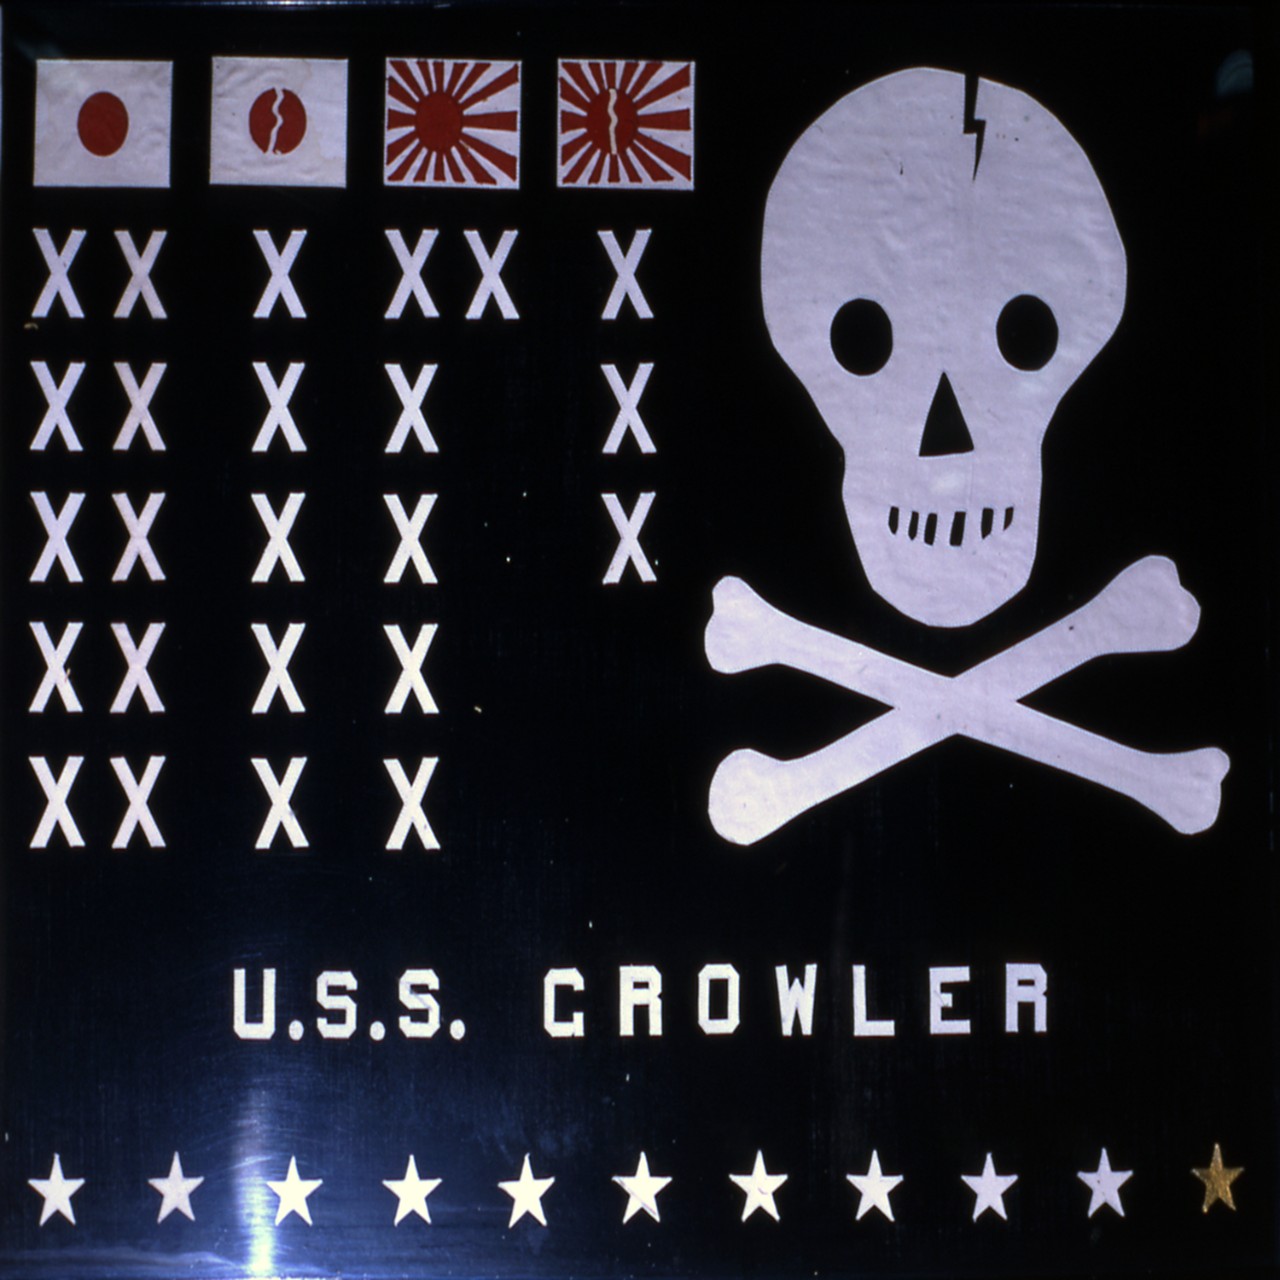 Battle flag of Growler depicts the enemy ships she had sunk as well as her eleven war patrols, with the gold star indicating she was on eternal patrol. (Naval History and Heritage Command Photograph UA 80.01.01)